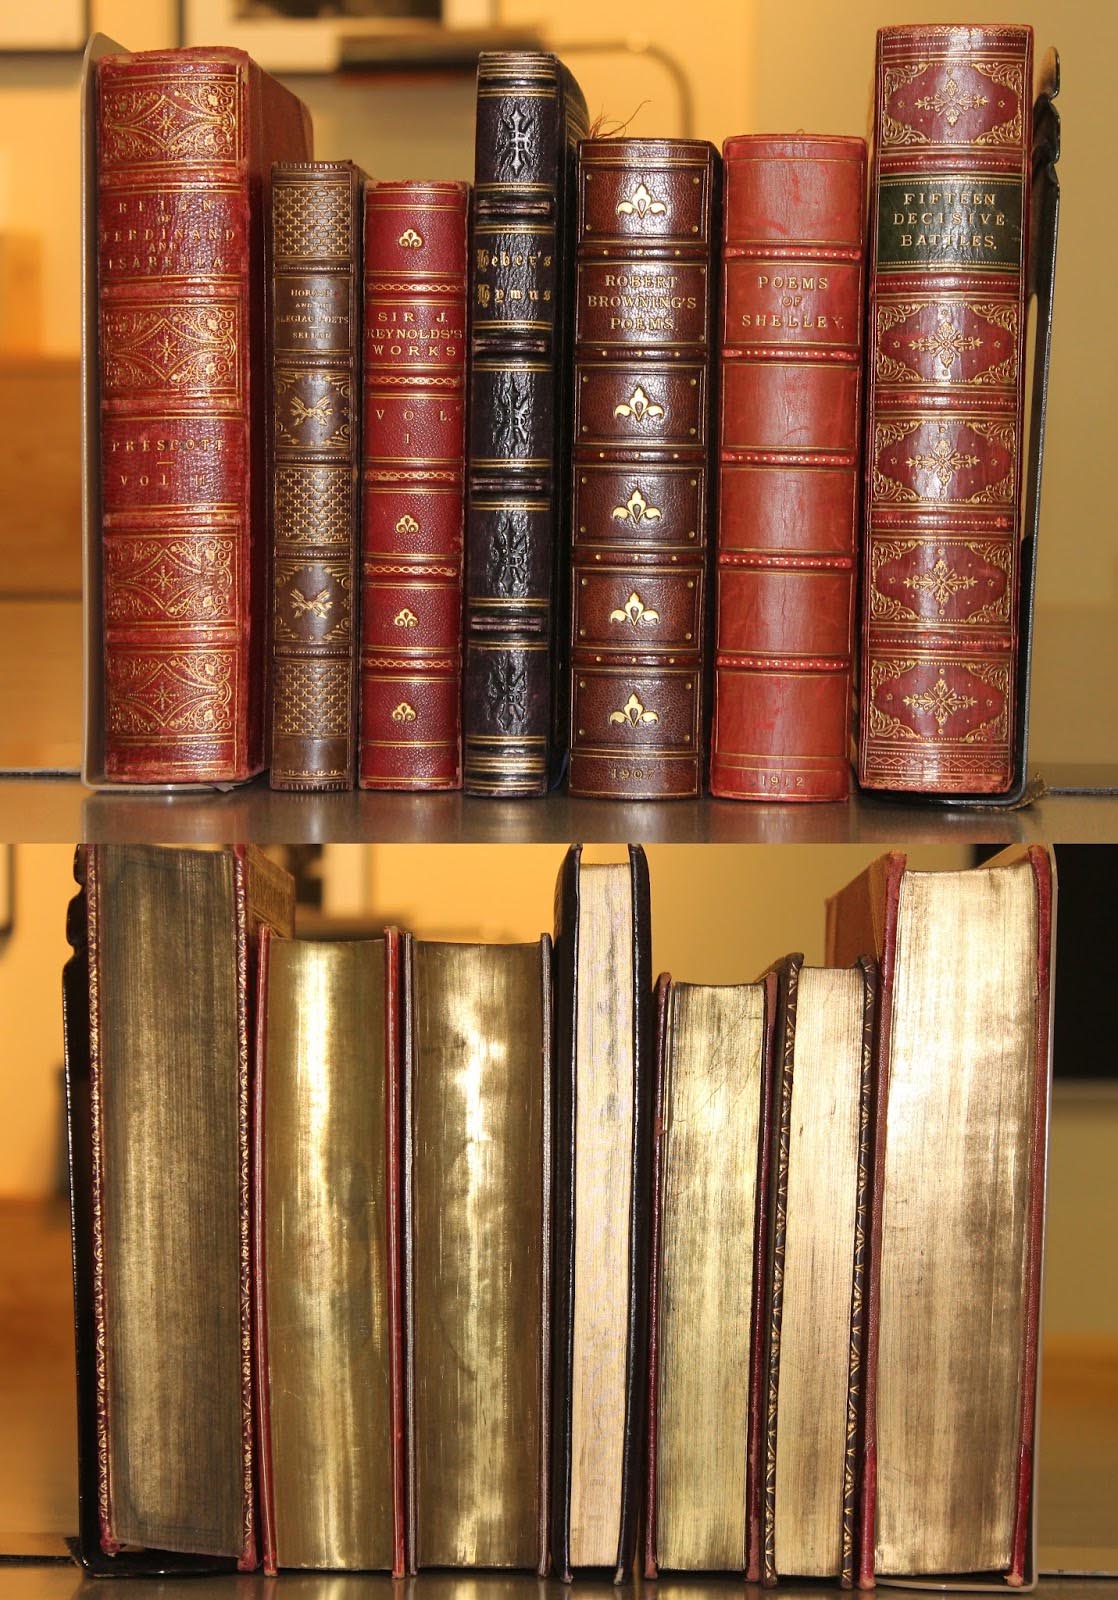 Decorated spines and gilded fore-edges on an handful of rare books.